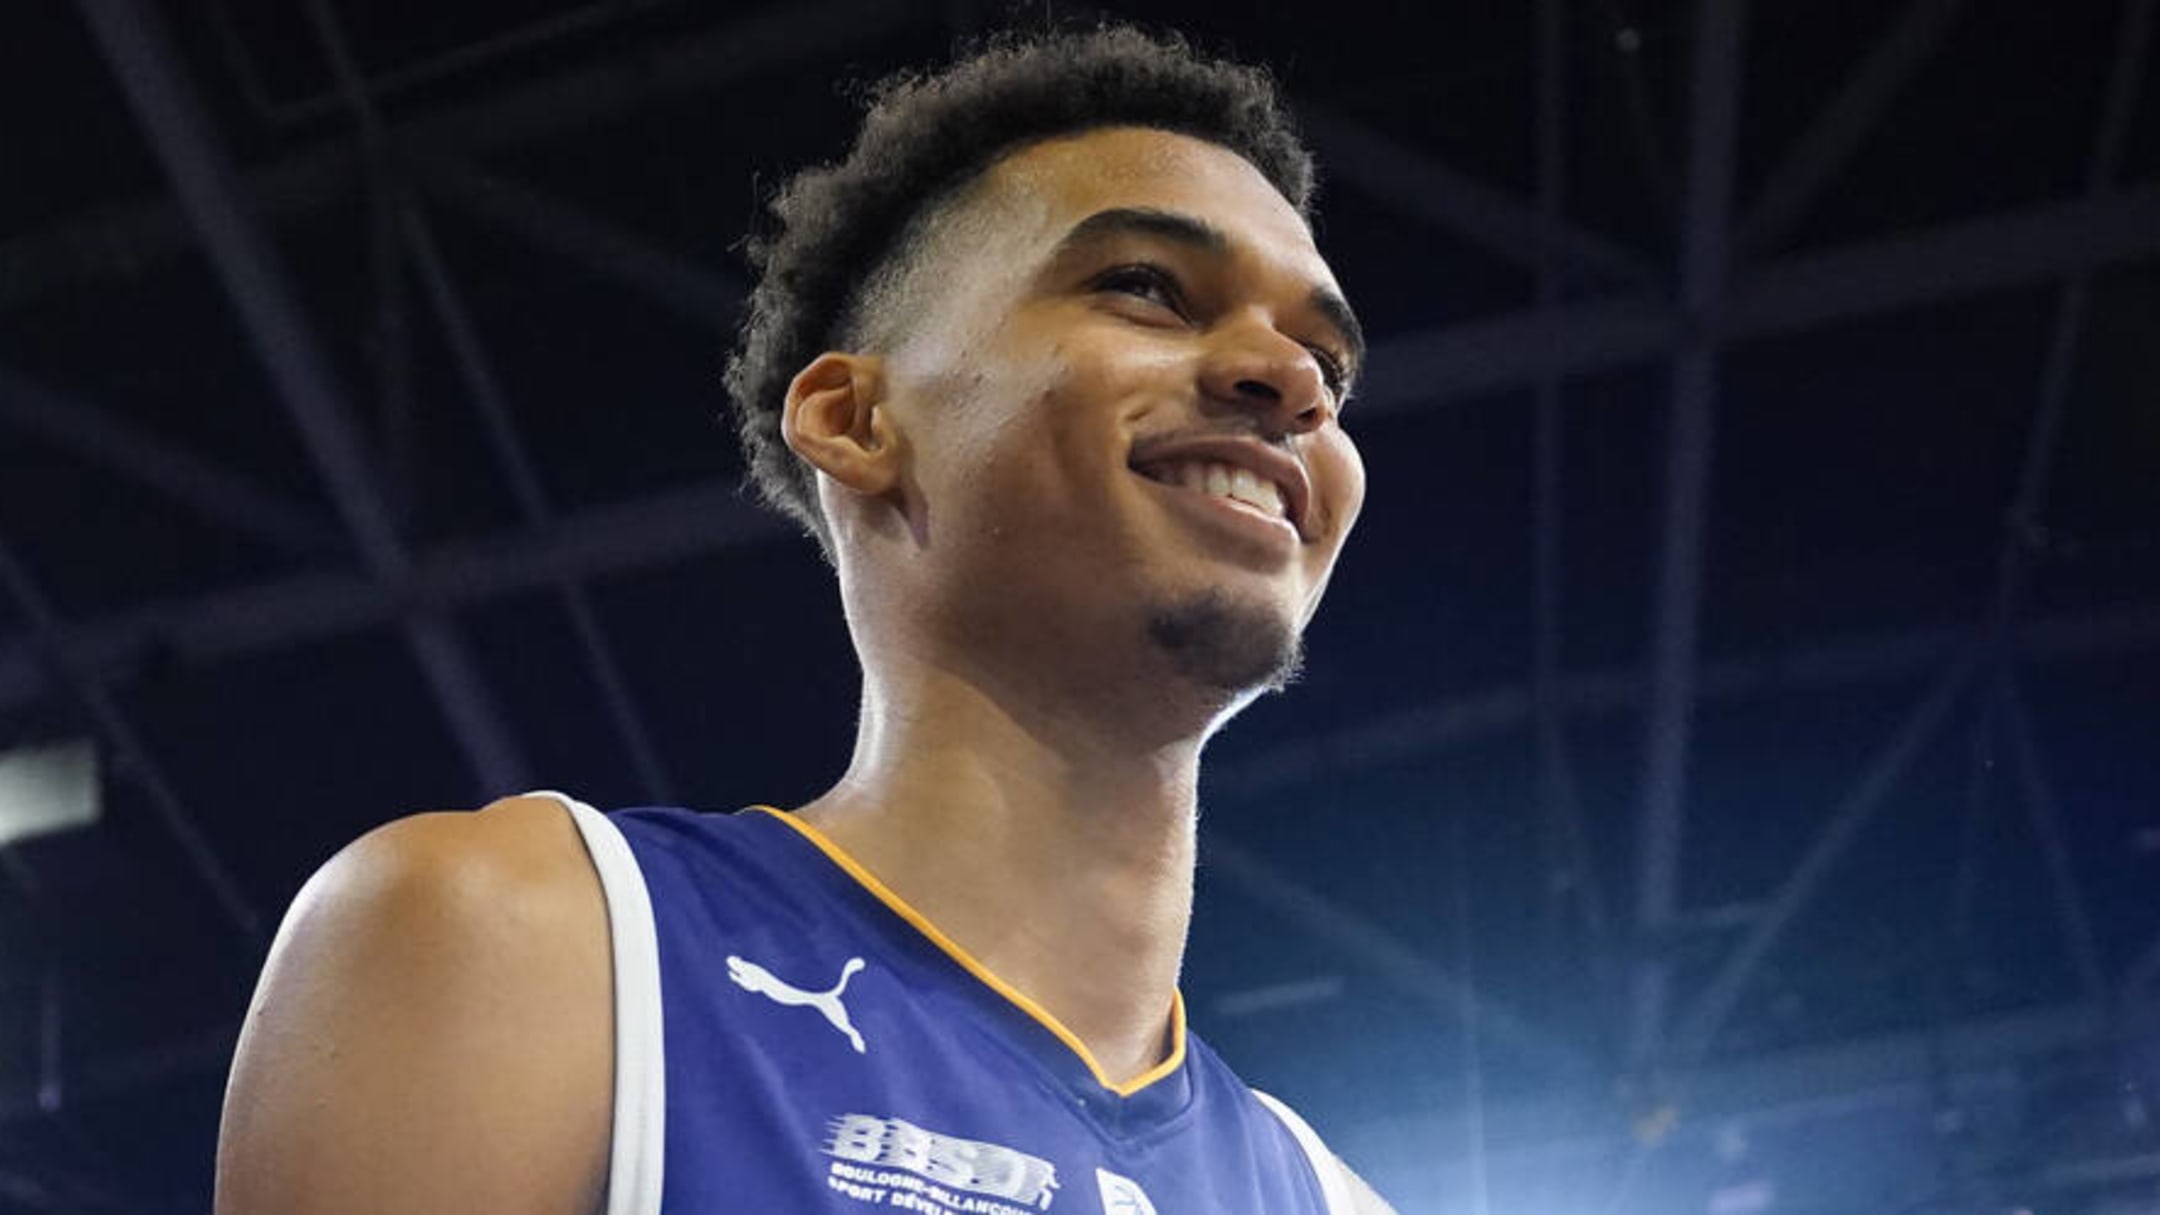 The Lakers began draft workouts to prepare for the No. 17 and No